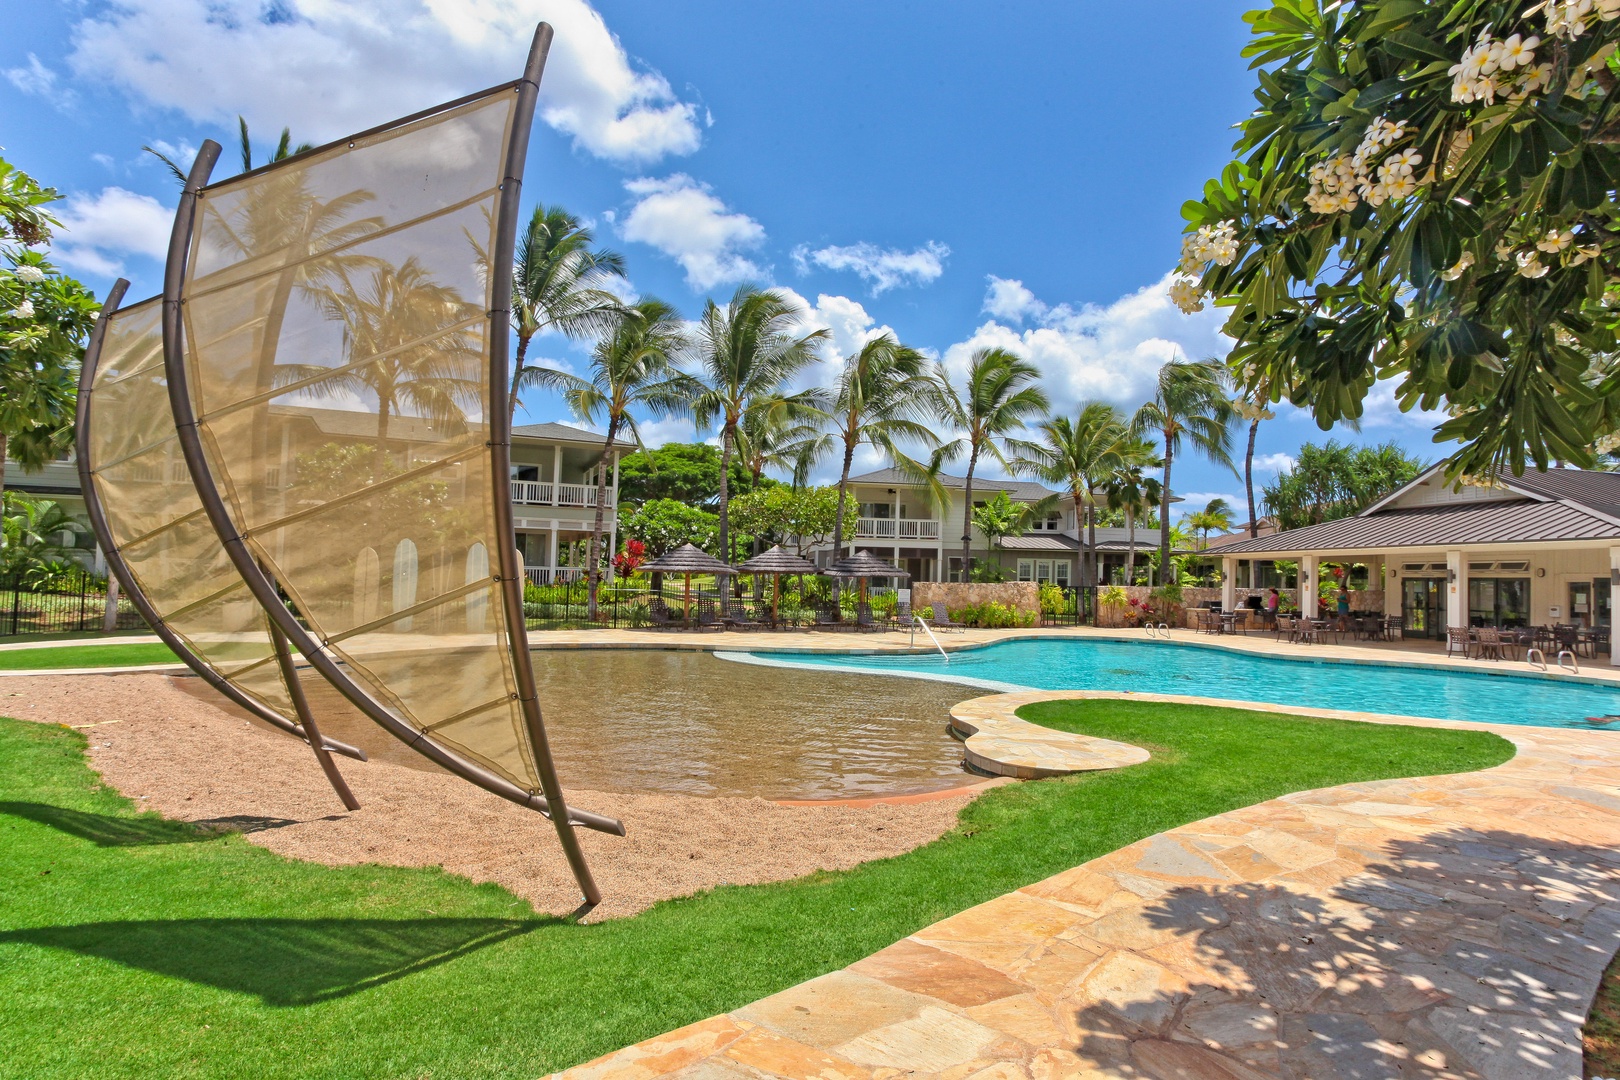 Kapolei Vacation Rentals, Coconut Plantation 1200-4 - The pool area is the best place for afternoon fun.